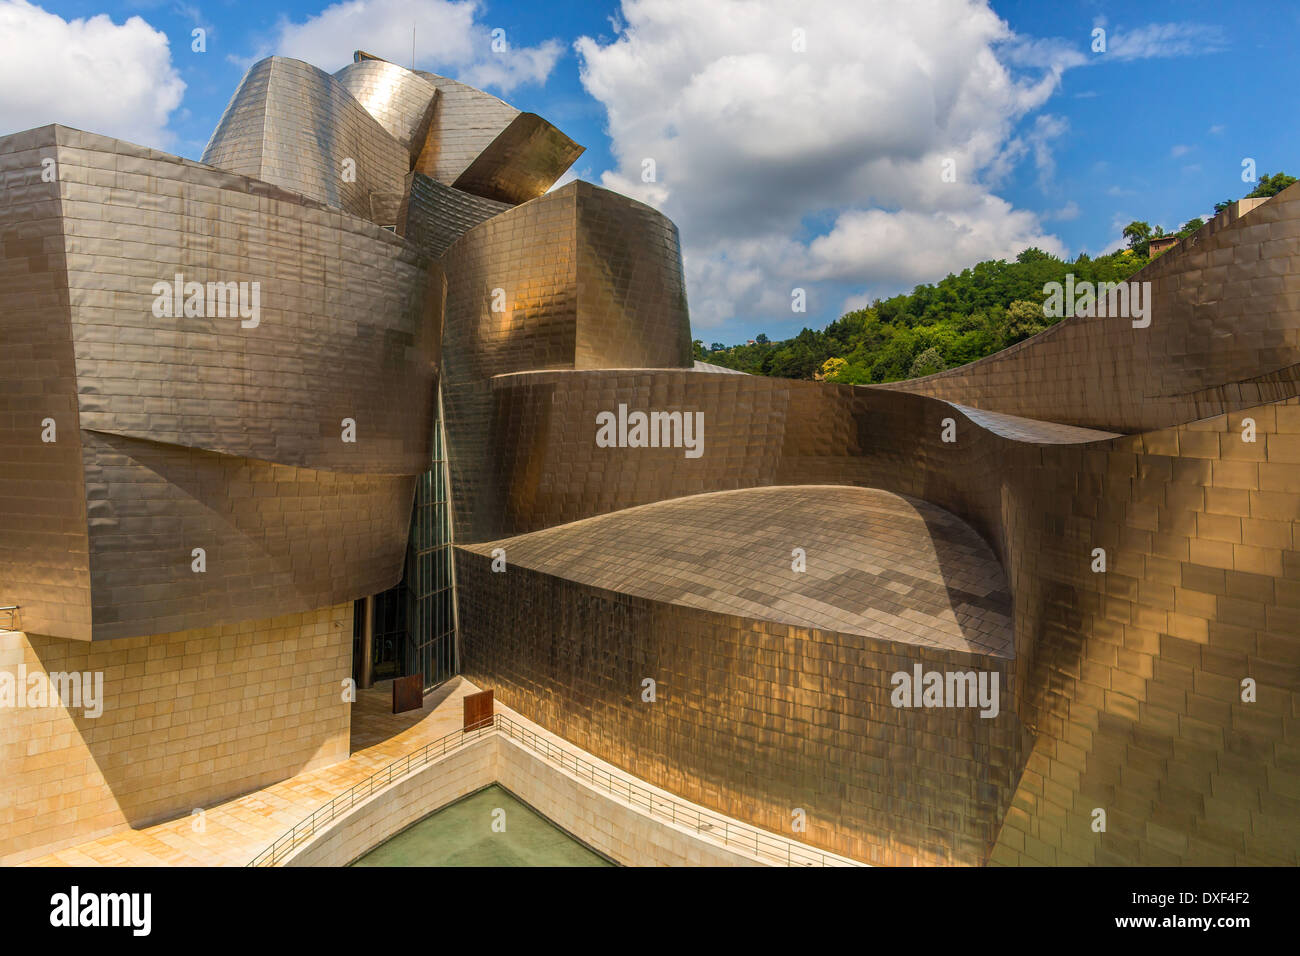 The Guggenheim Museum in the seaport of Bilbao in the province of Biscay in northern Spain. Stock Photo